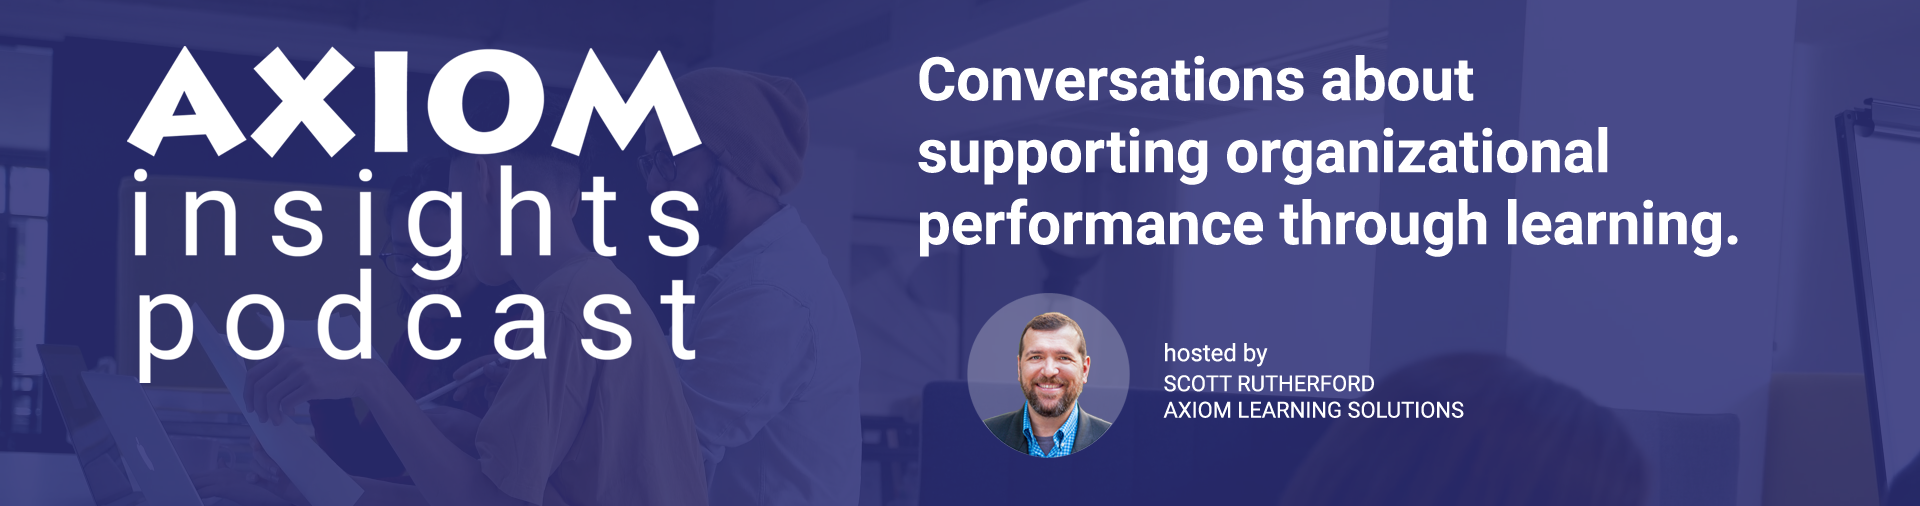 AXIOM Insights Podcast - Conversations about supporting organizational performance through learning